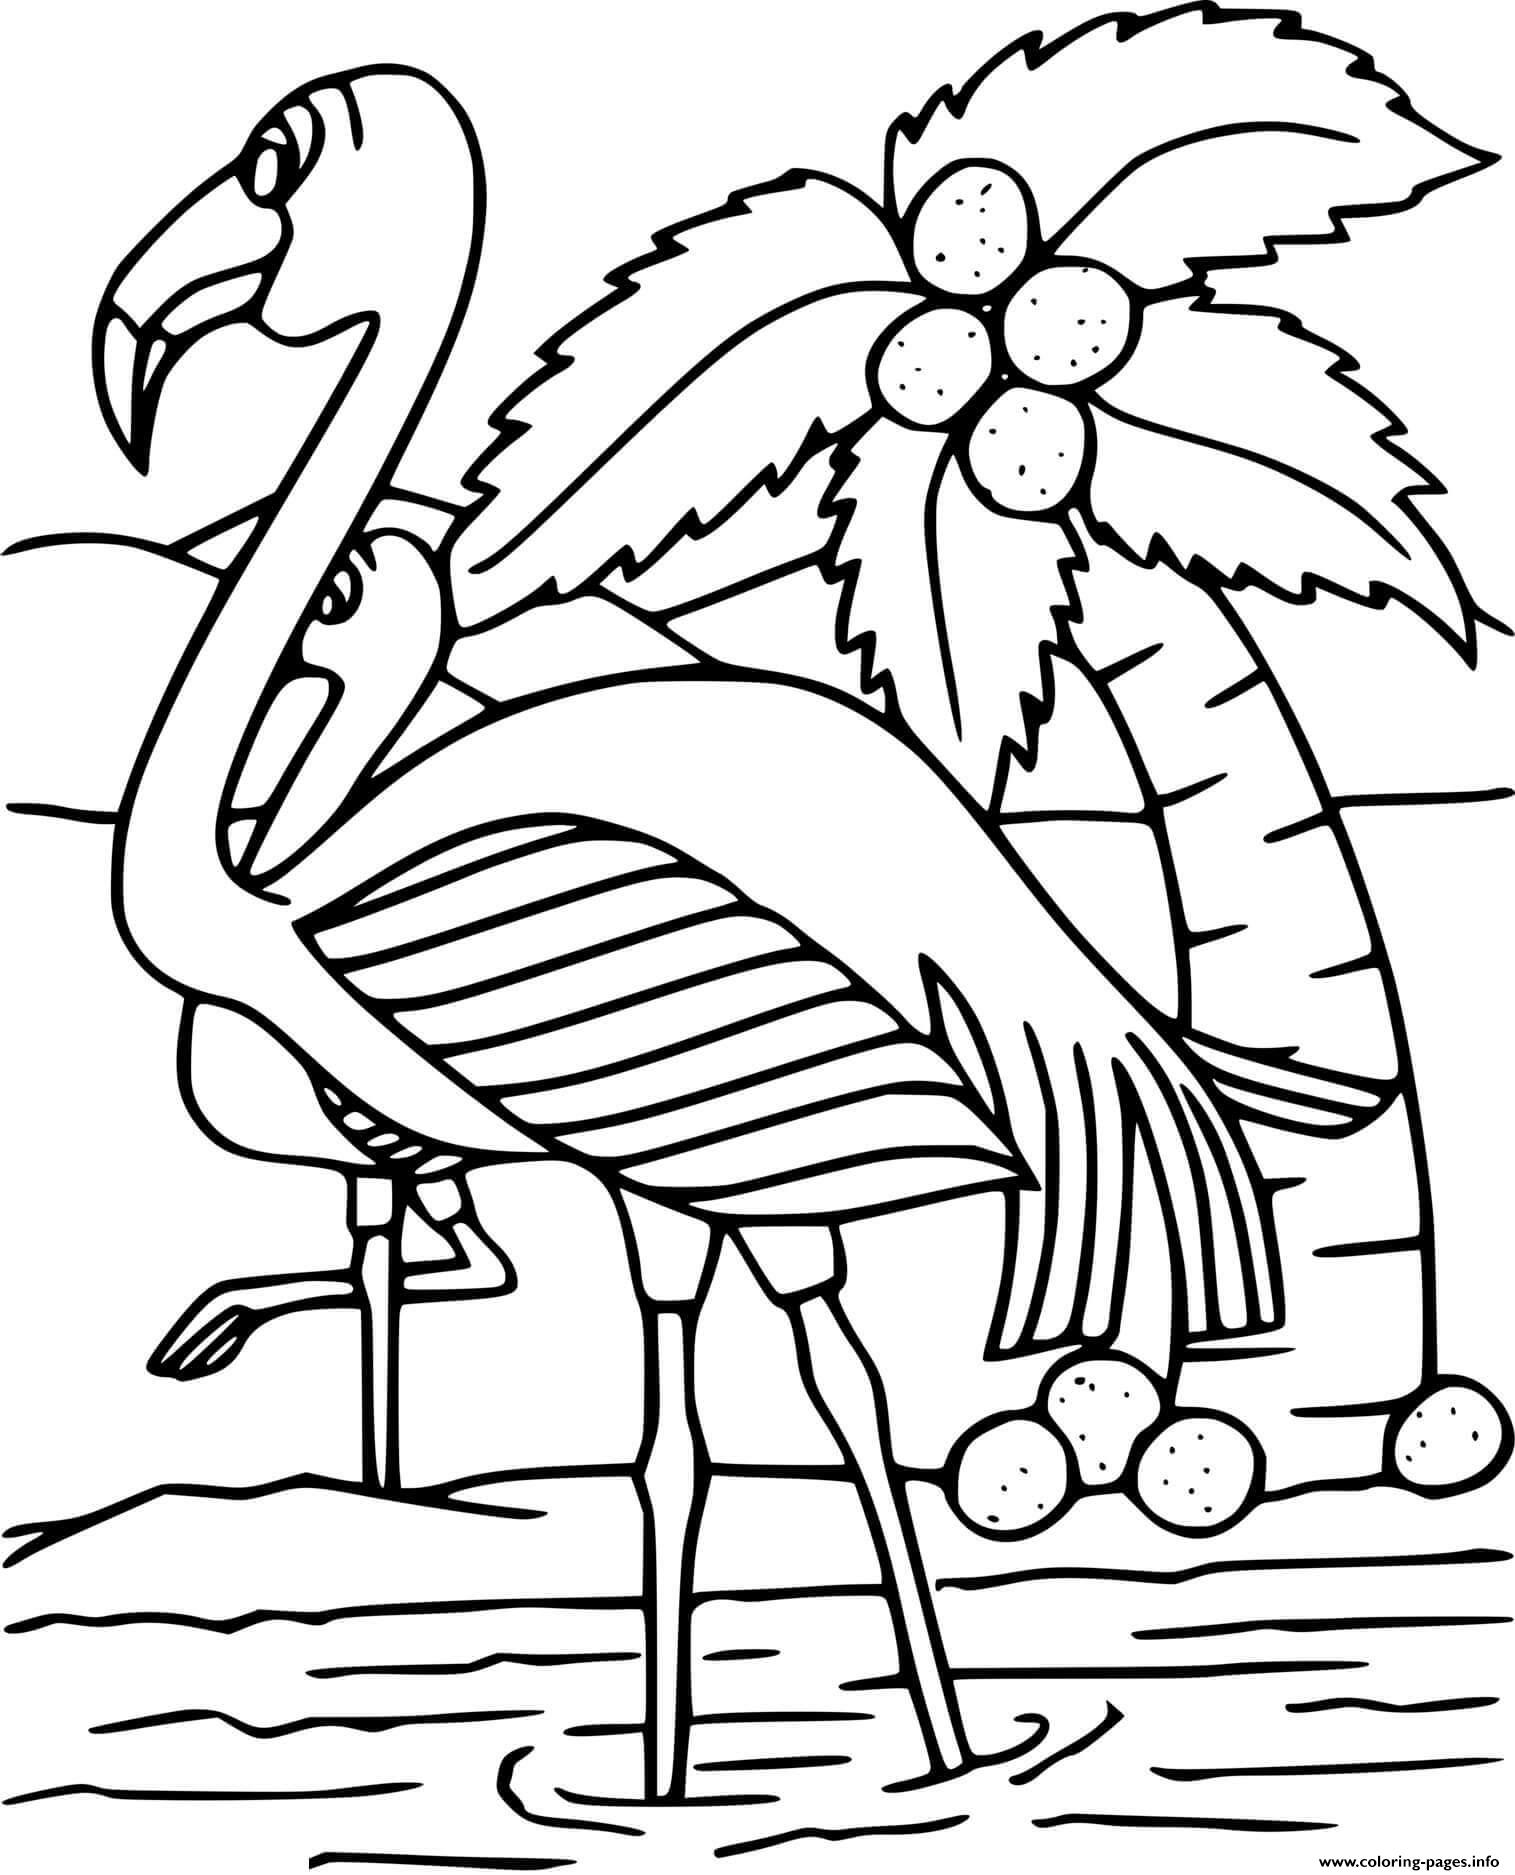 Flamingos And Coconut Tree coloring